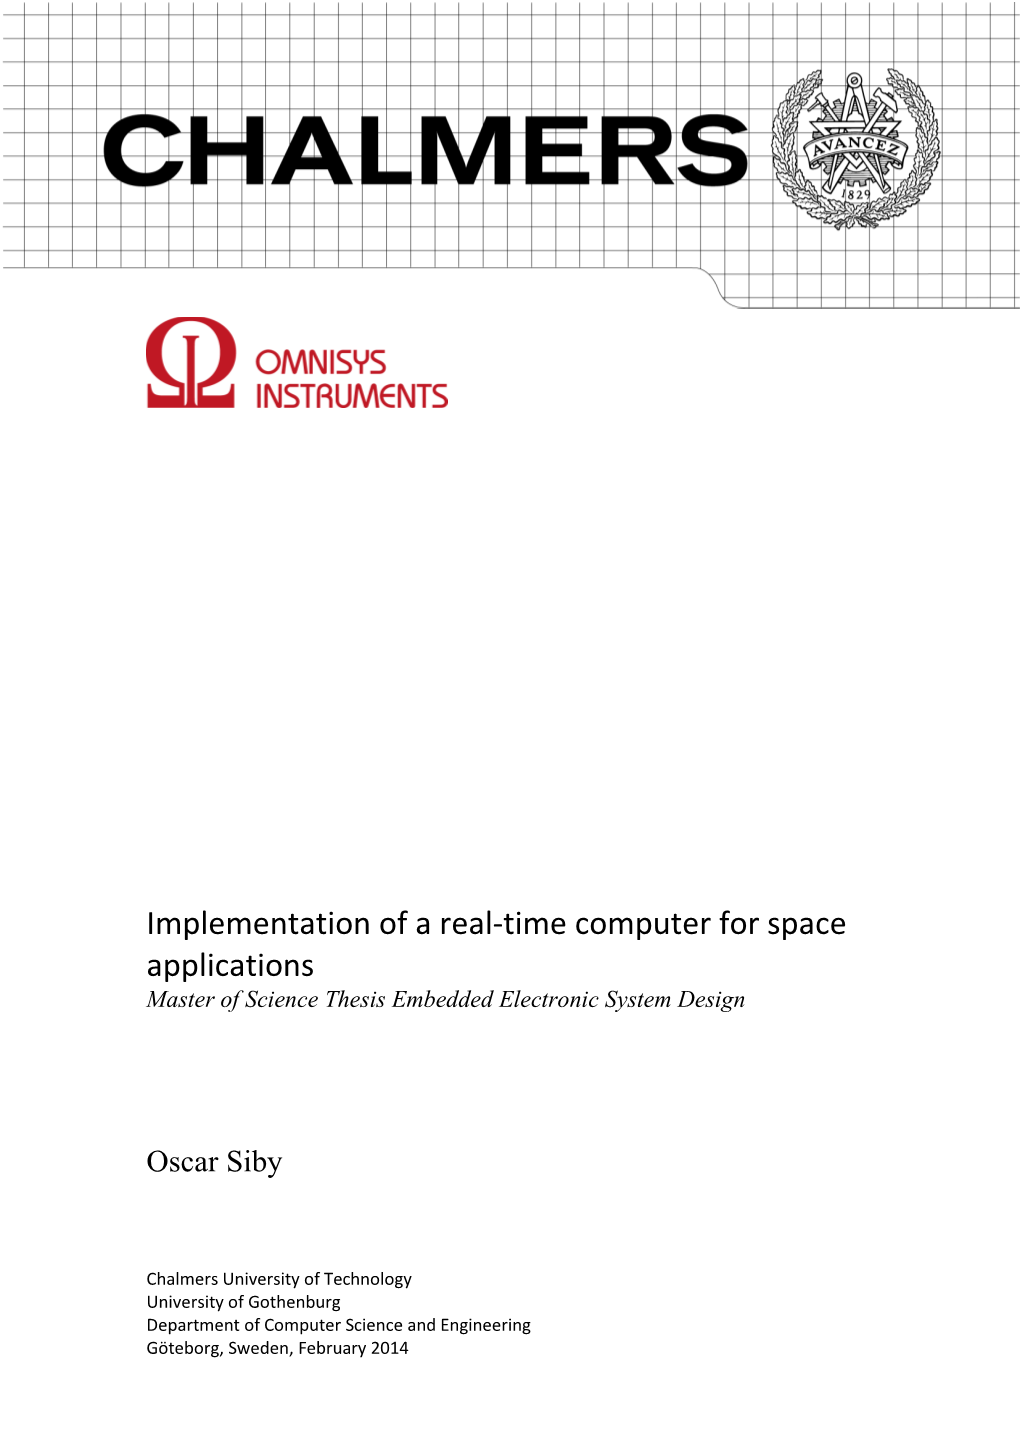 Implementation of a Real-Time Computer for Space Applications Master of Science Thesis Embedded Electronic System Design